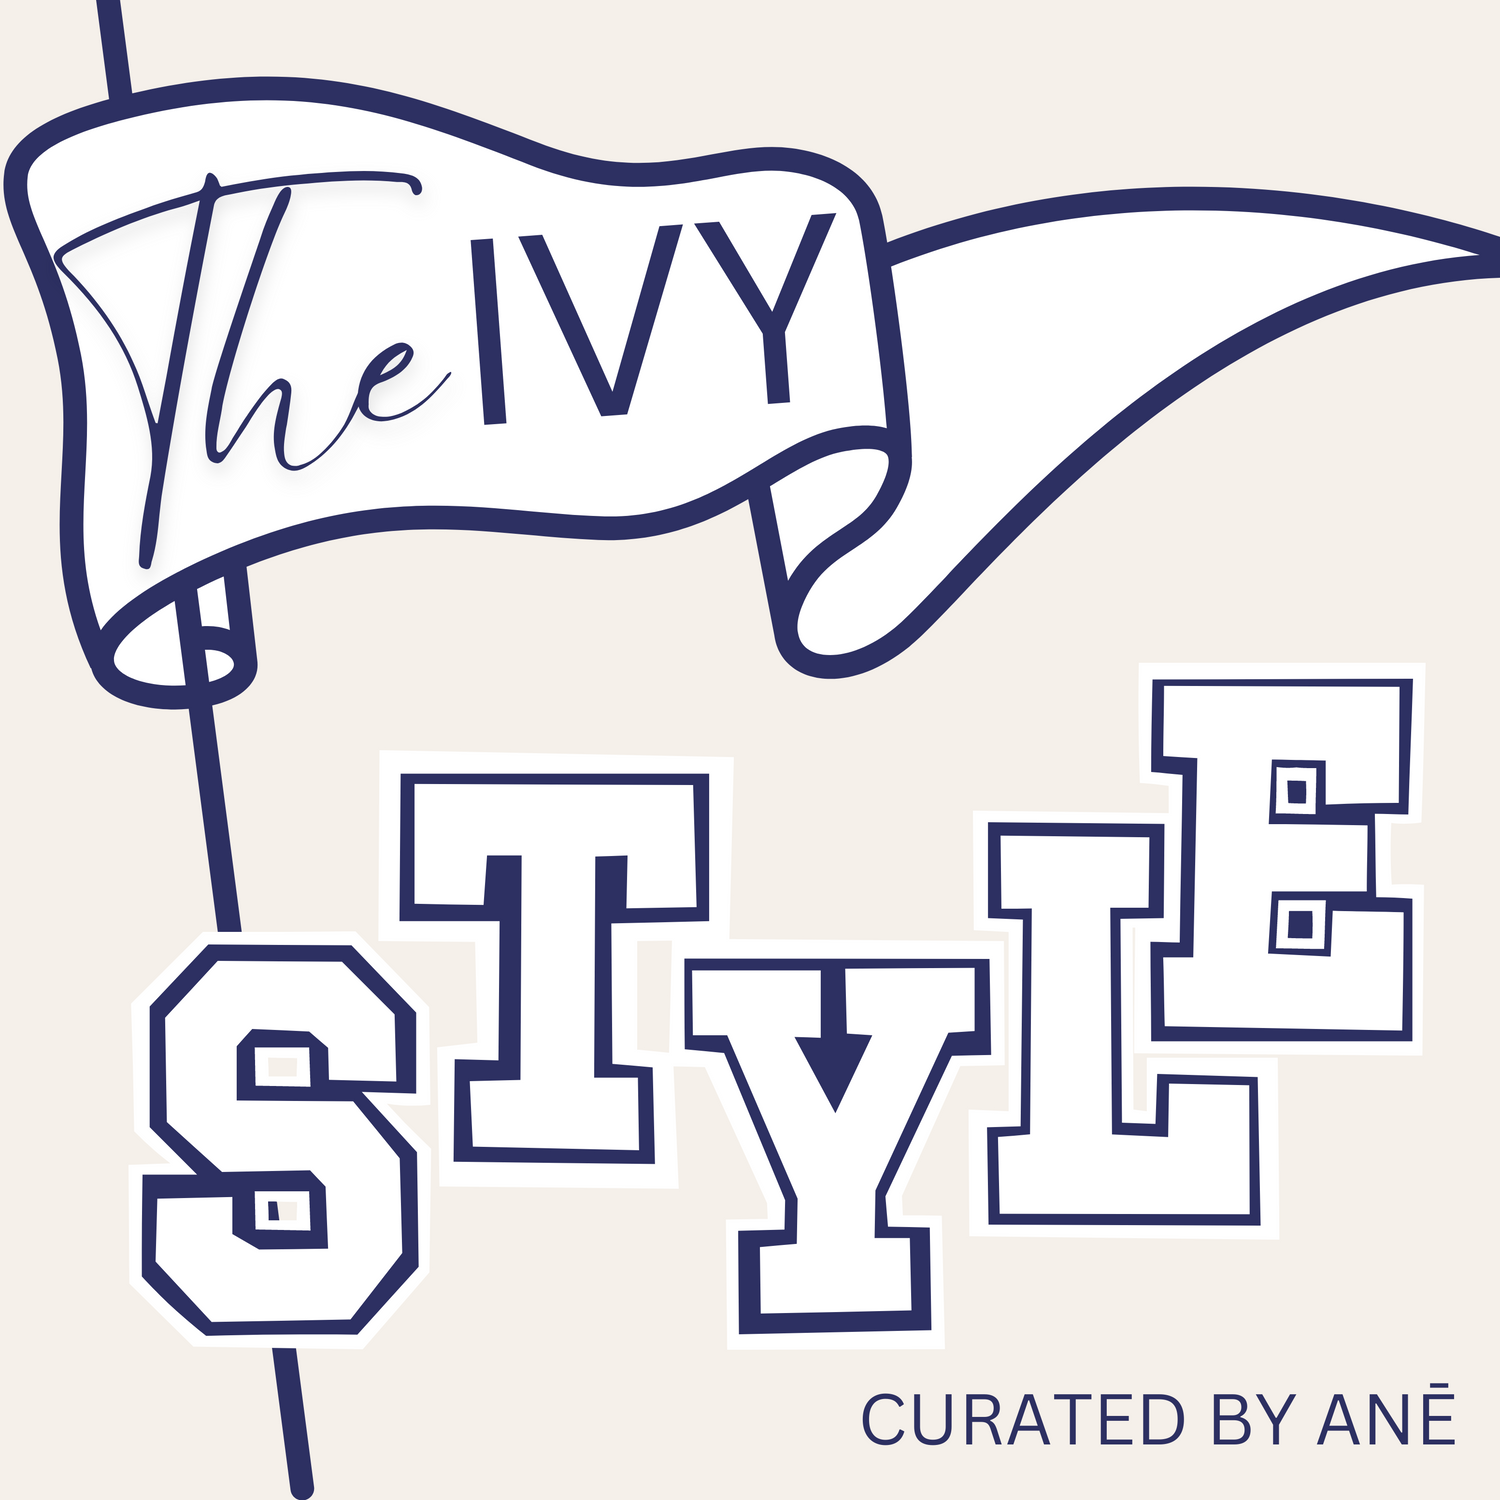 THE IVY STYLE